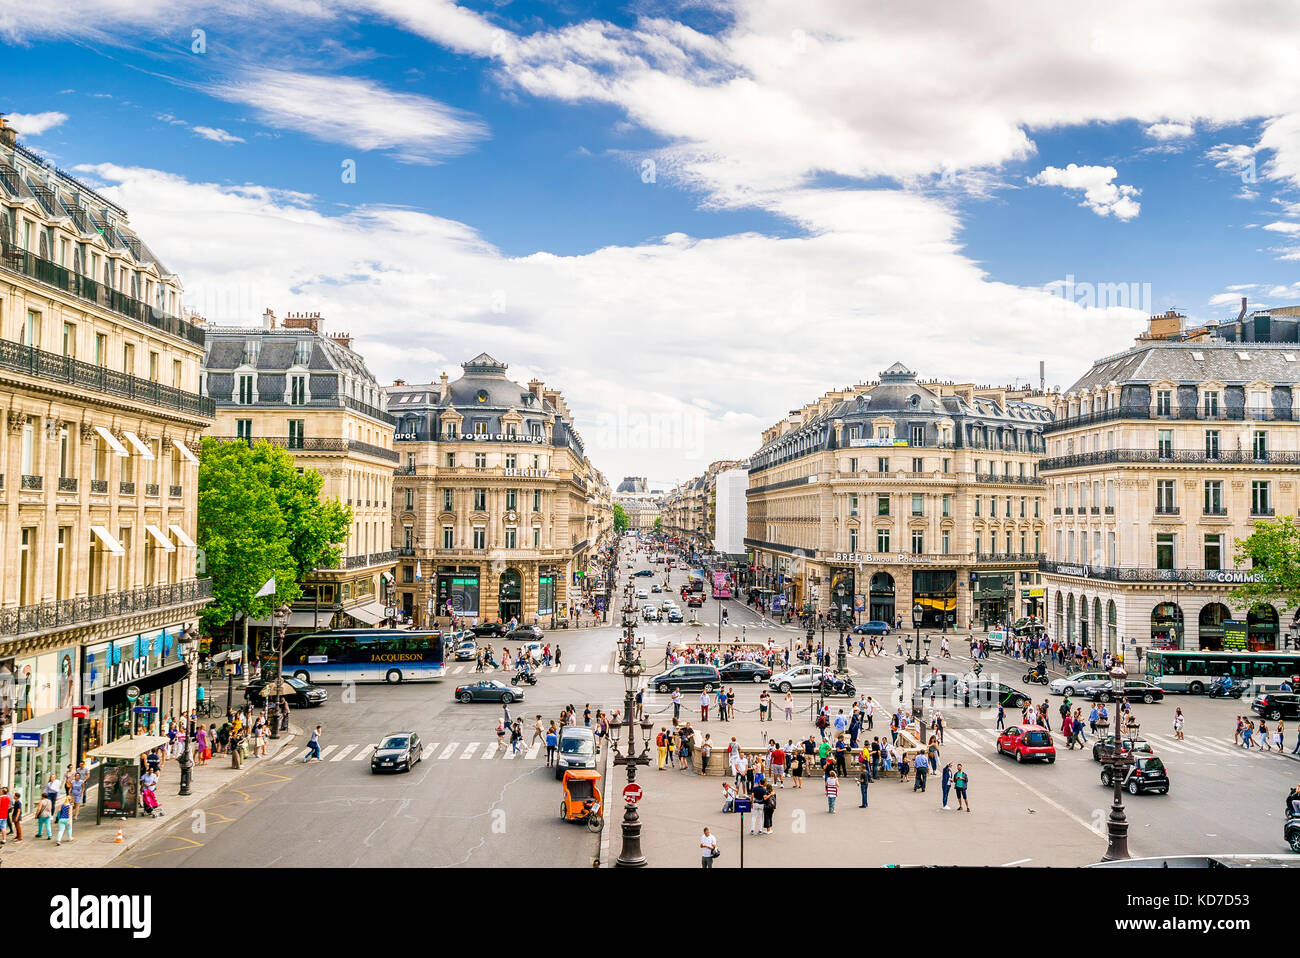 The Place de l'Opéra, as known as Opera Square is the square is located in front of the Garnier Palace in Paris, France Stock Photo